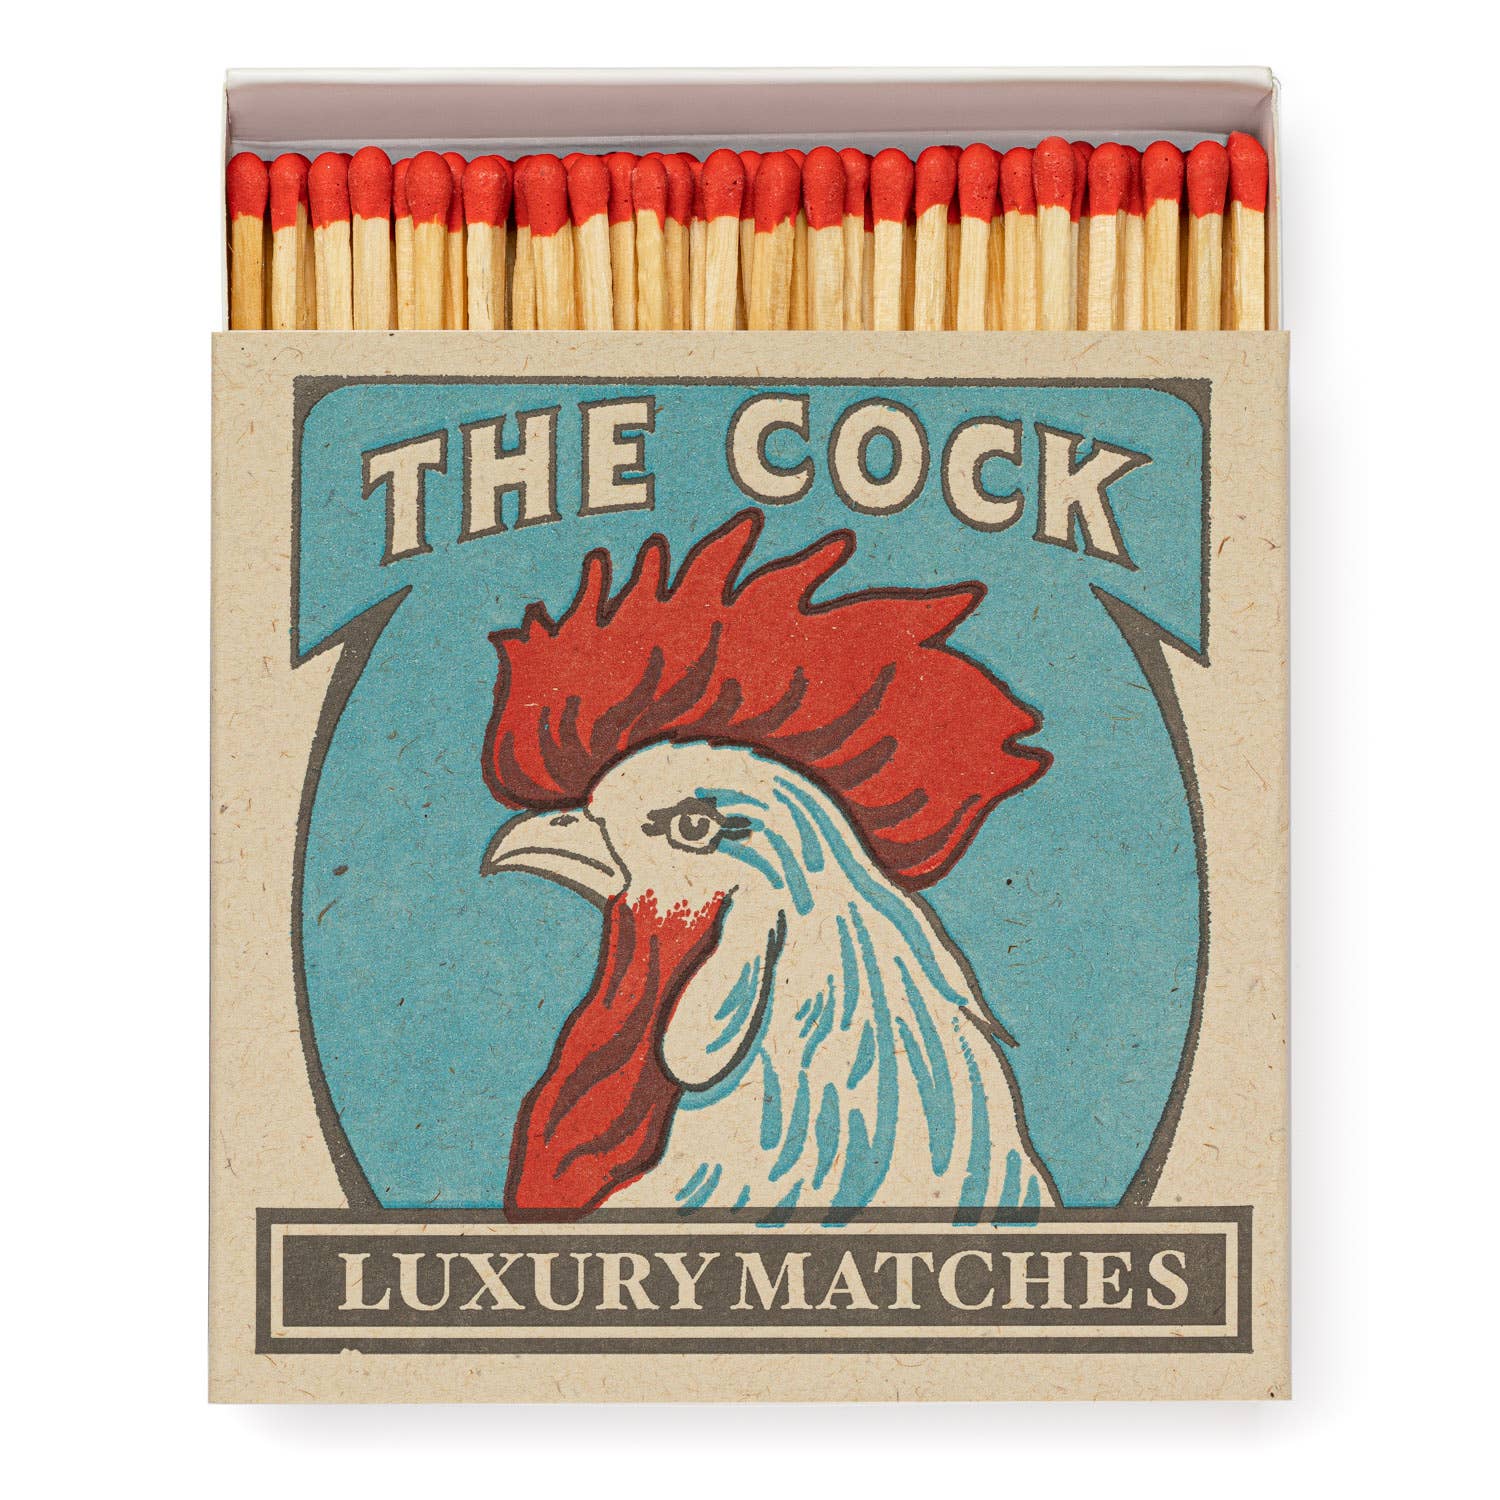 The Cock Square Matchbox